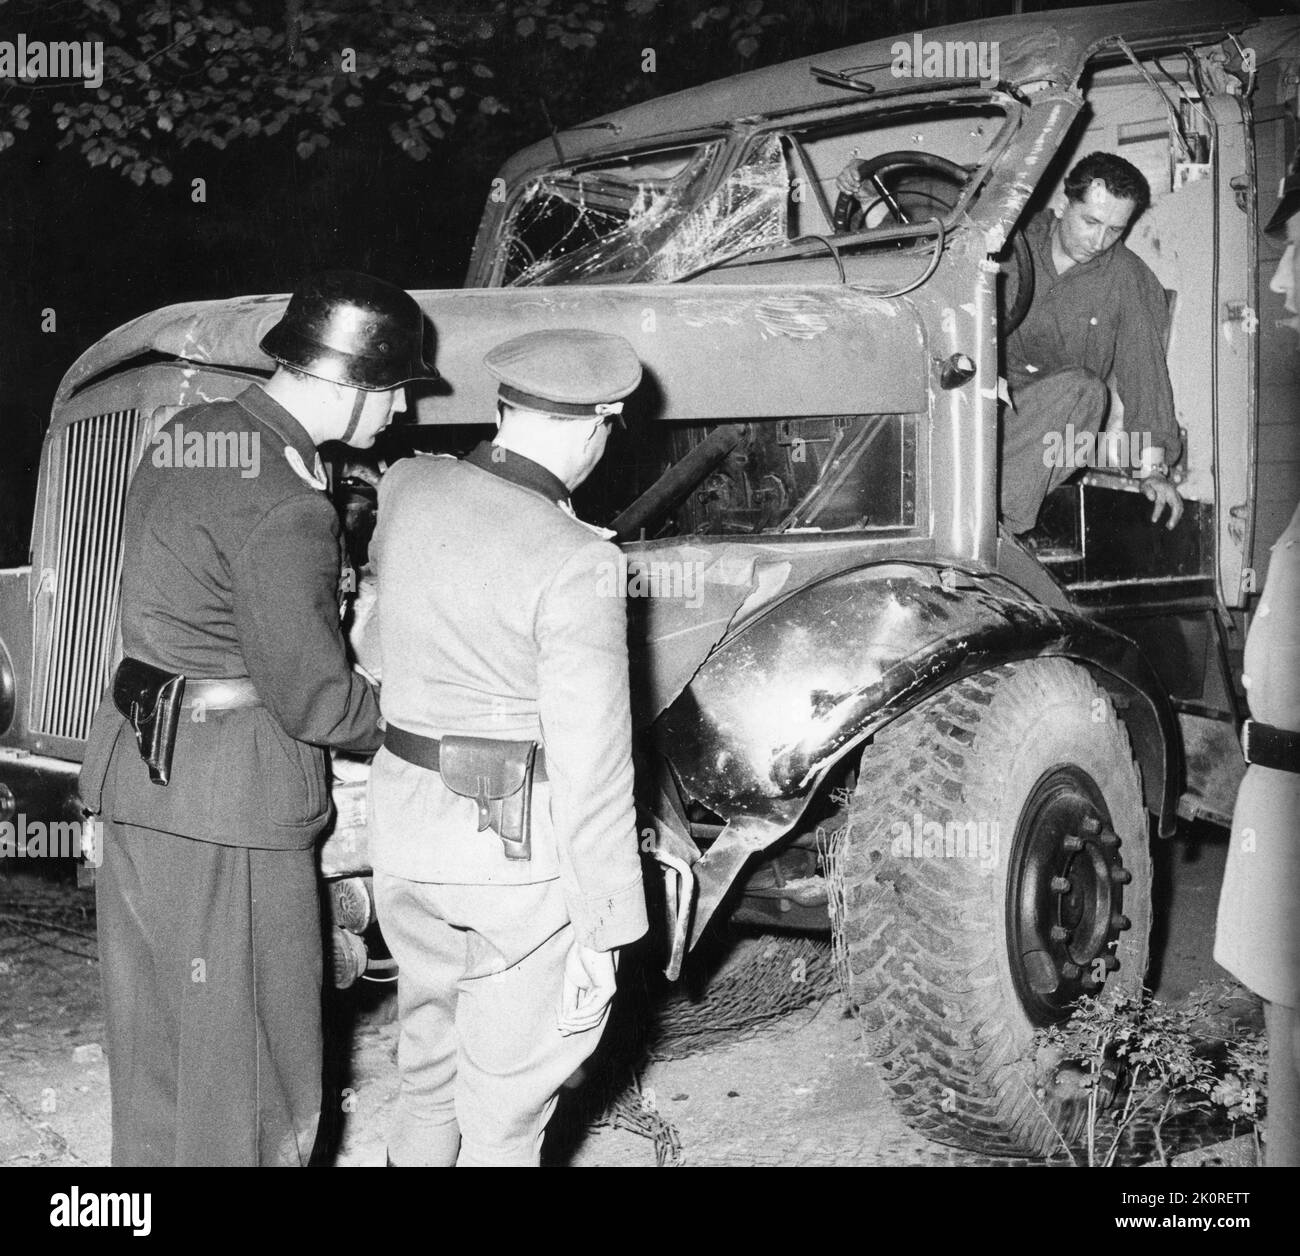 East German police (foreground) inspect a truck used to ram the Berlin wall in an escape effort from the Soviet sector of the city. Although the truck did not leave the Communist sector, the occupants were successful in escaping to the West through the hole made by the truck, Berlin, East Germany, 1961. (Photo by United States Information Agency) Stock Photo